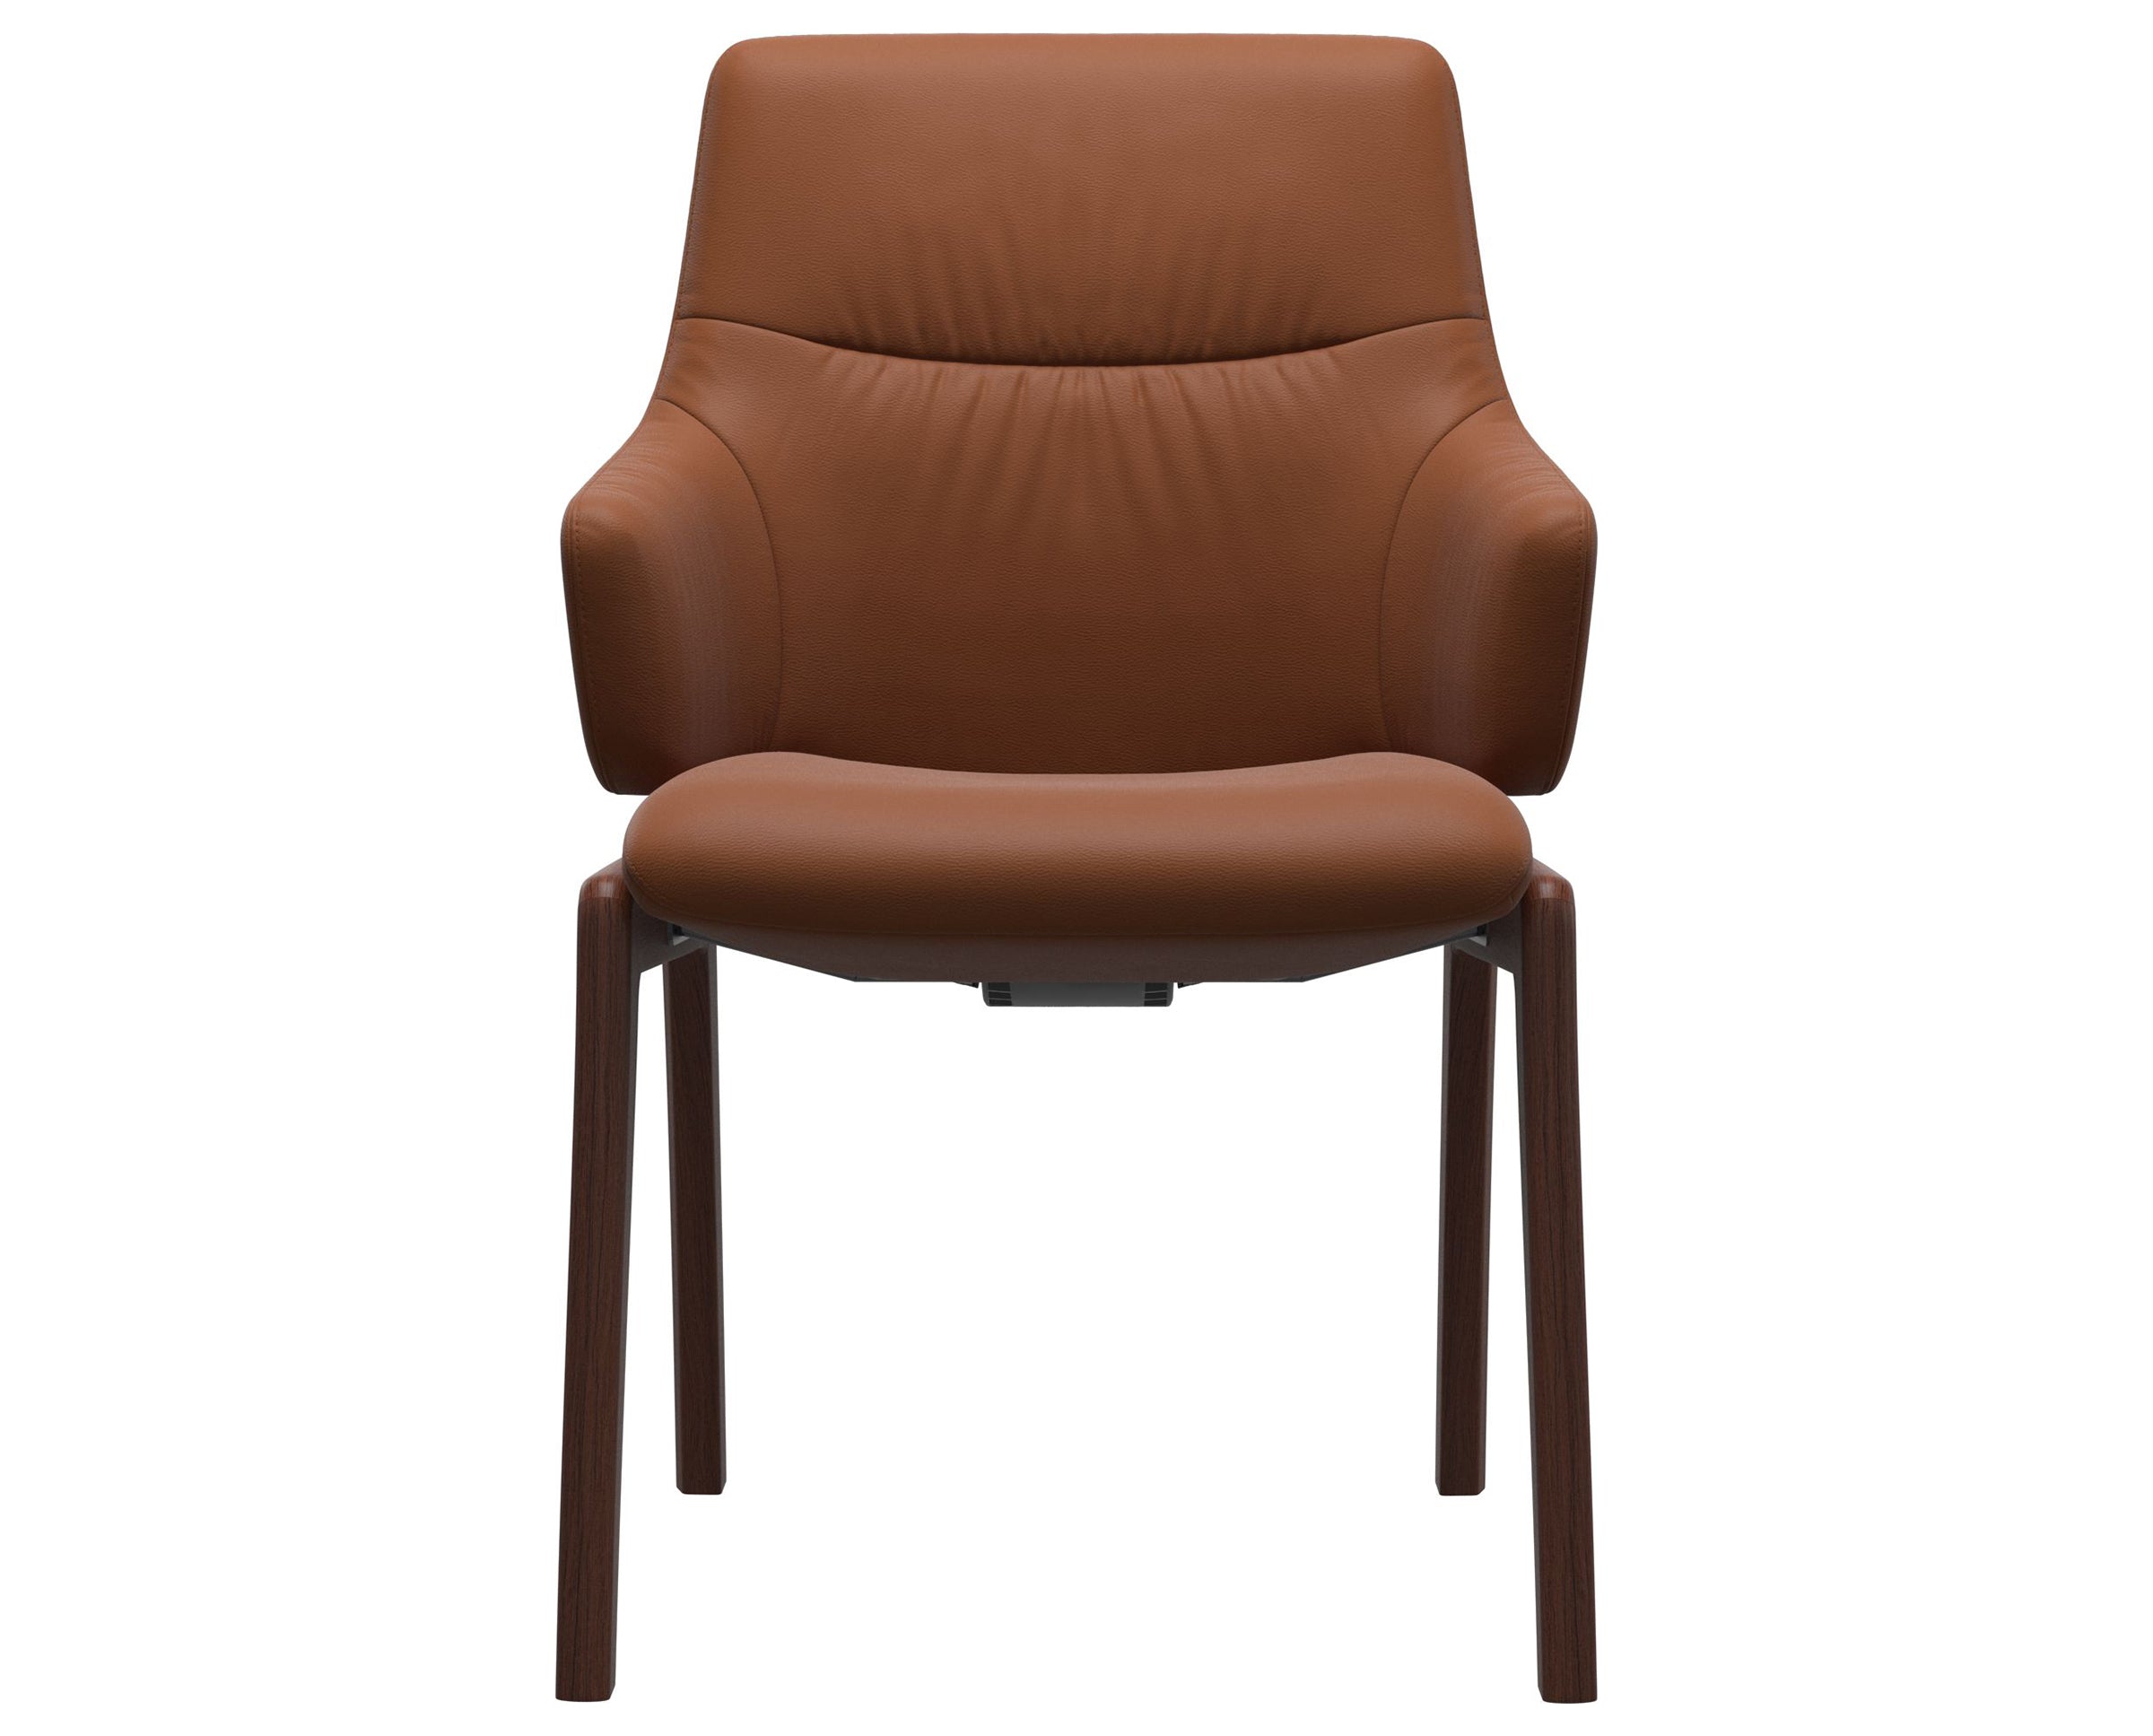 Paloma Leather New Cognac and Walnut Base | Stressless Mint Low Back D100 Dining Chair w/Arms | Valley Ridge Furniture